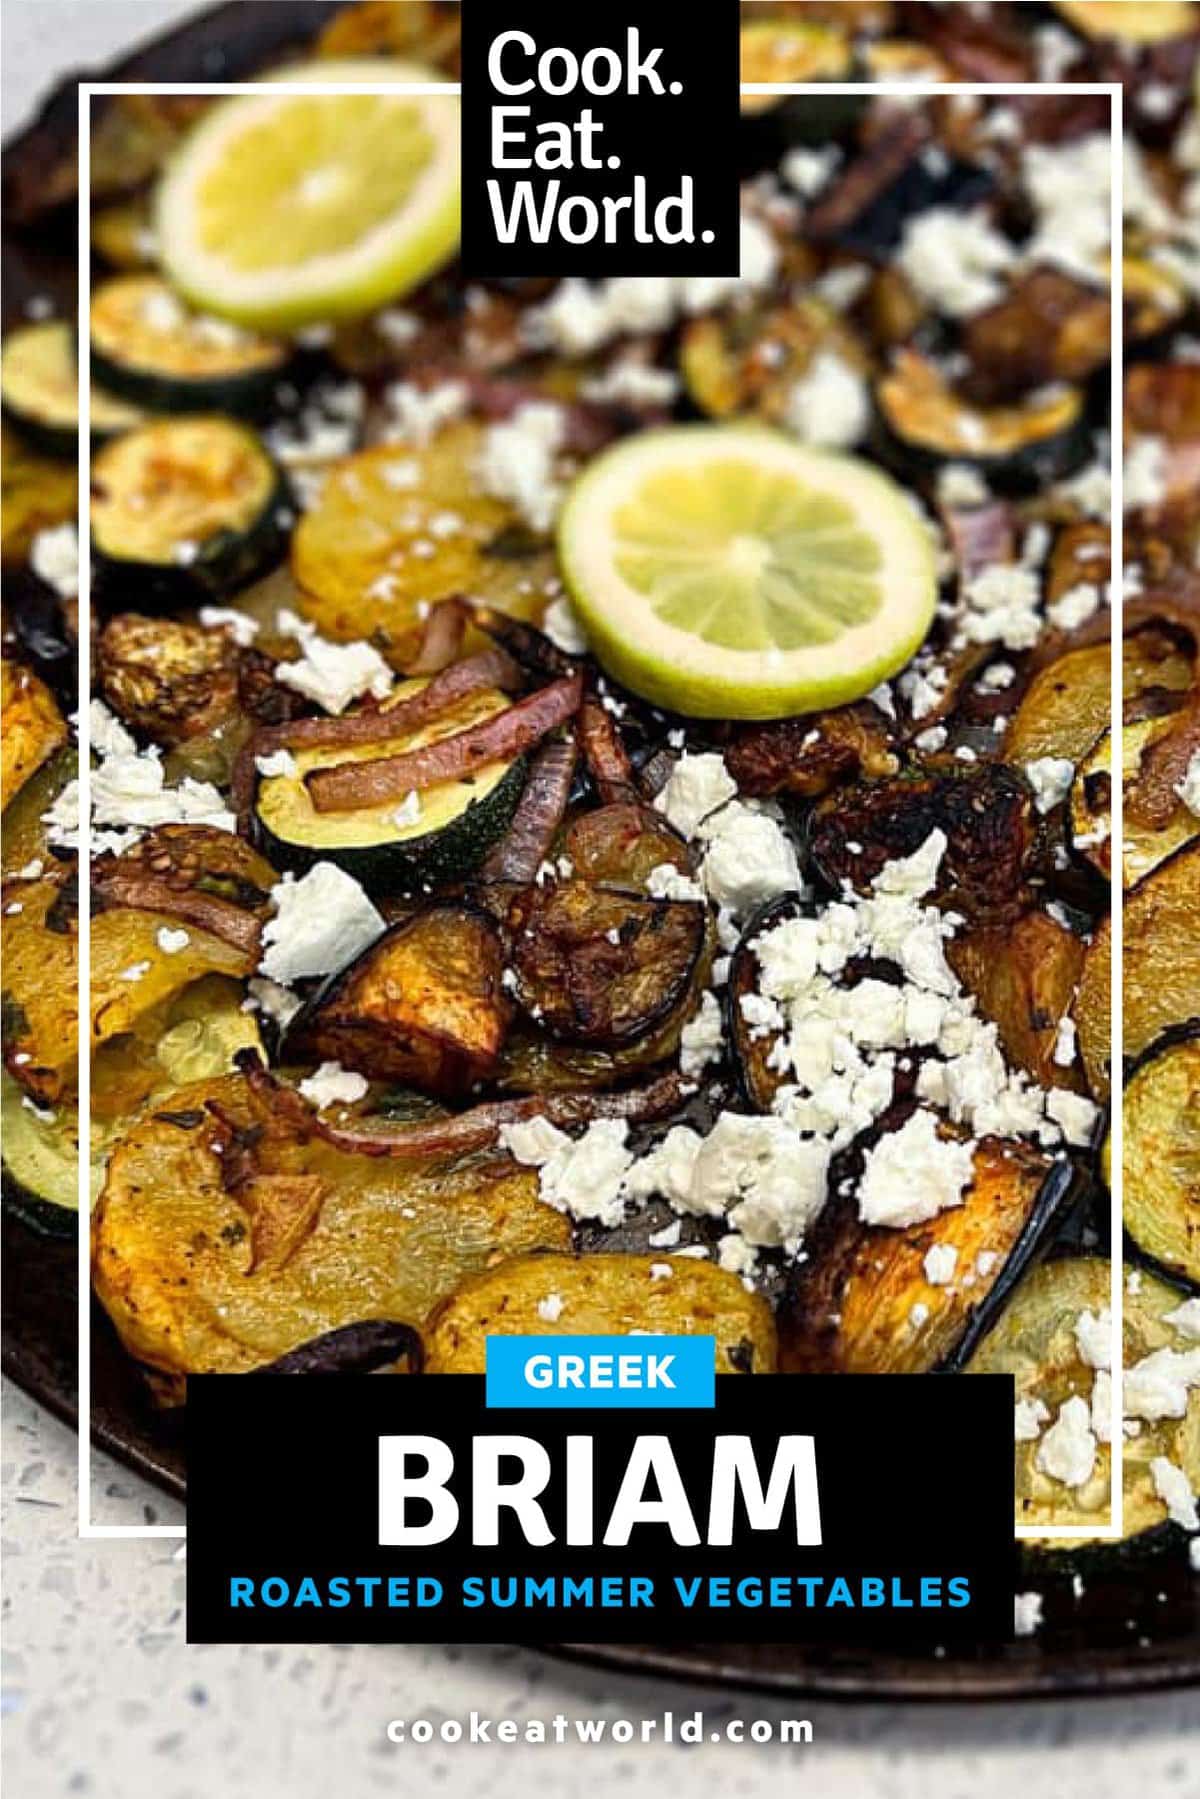 A platter of Greek Roasted Vegetables called Briam scattered with feta cheese and lemon slices